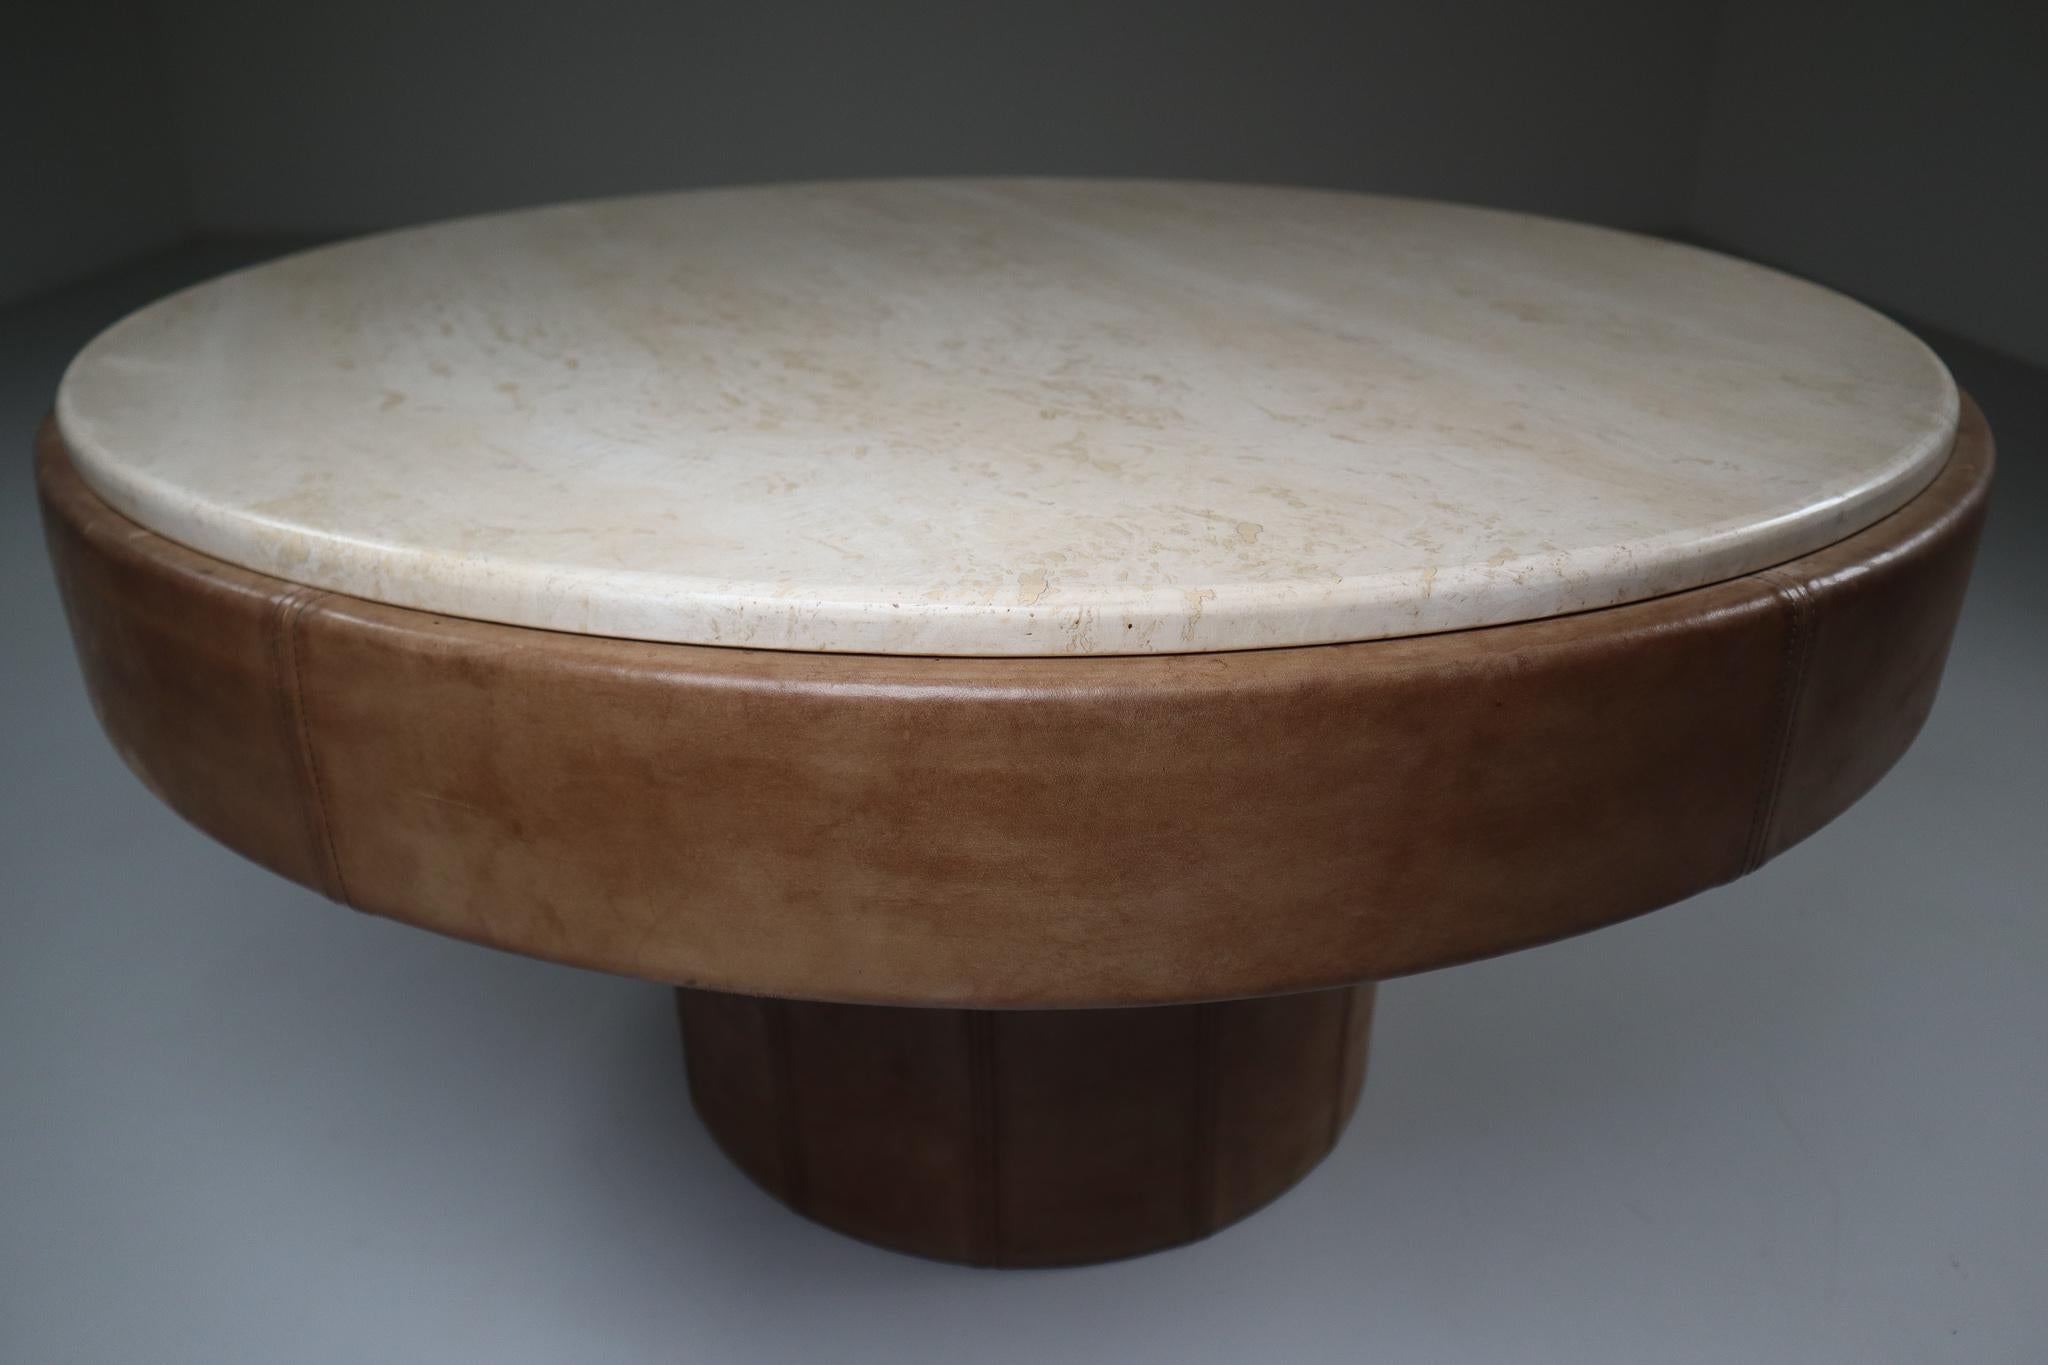 De Sede round coffee table 1970s, made of the highest quality buffalo leather in a unique patinated cognac color leather and soft colored marble top. Remains in excellent and original condition. The leather and construction are very good vintage